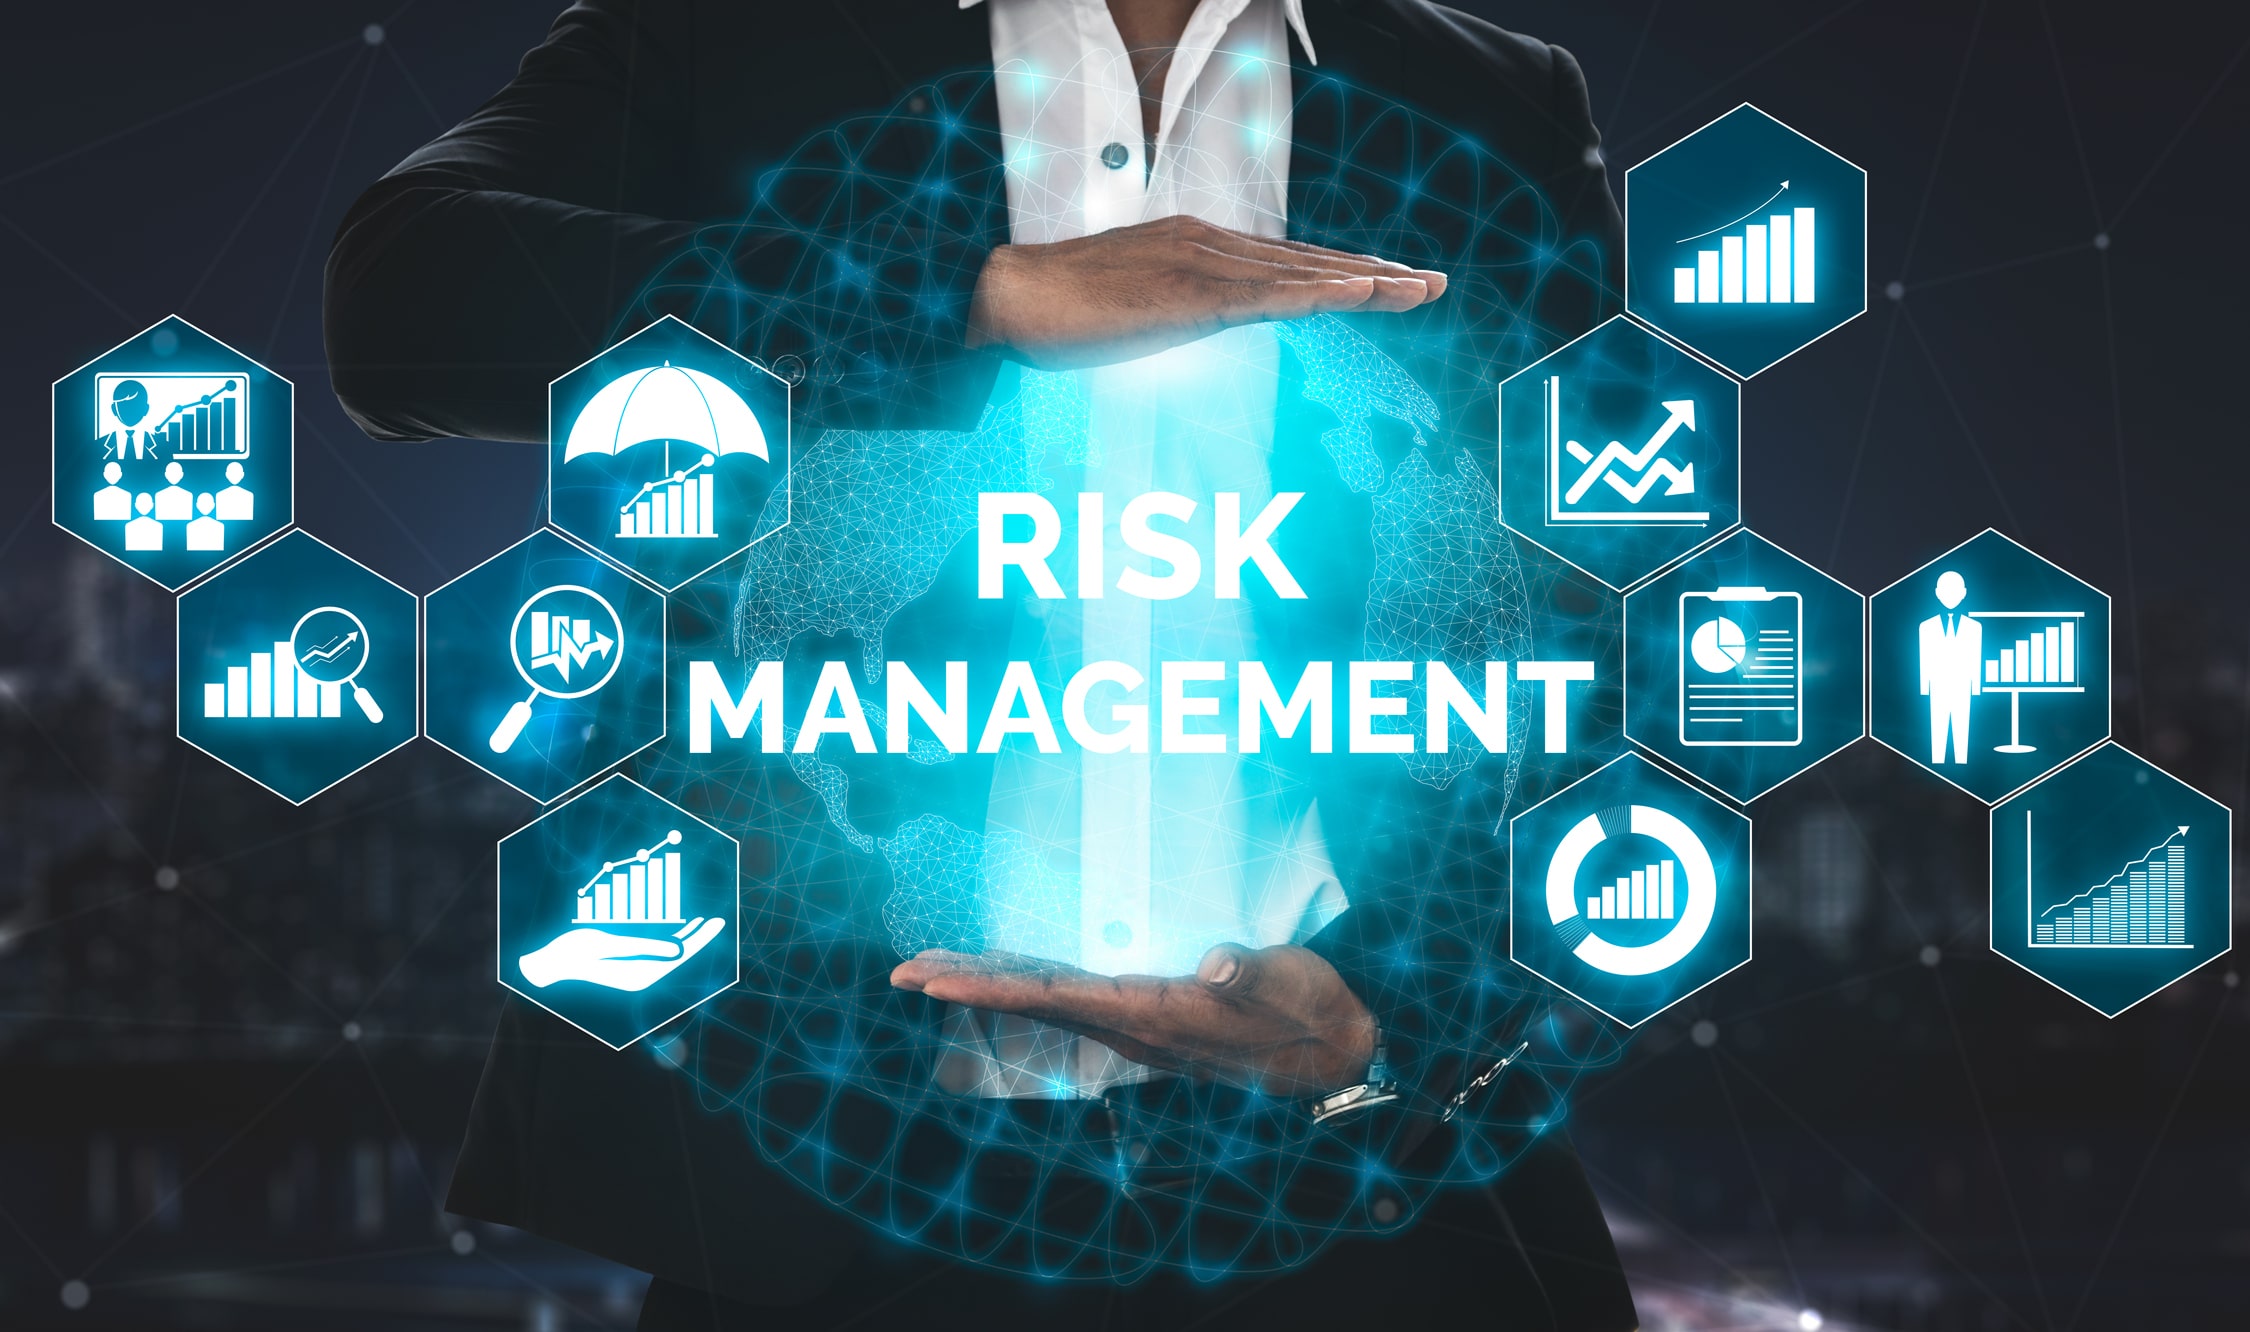 Crisis Management Checklist for Small Businesses